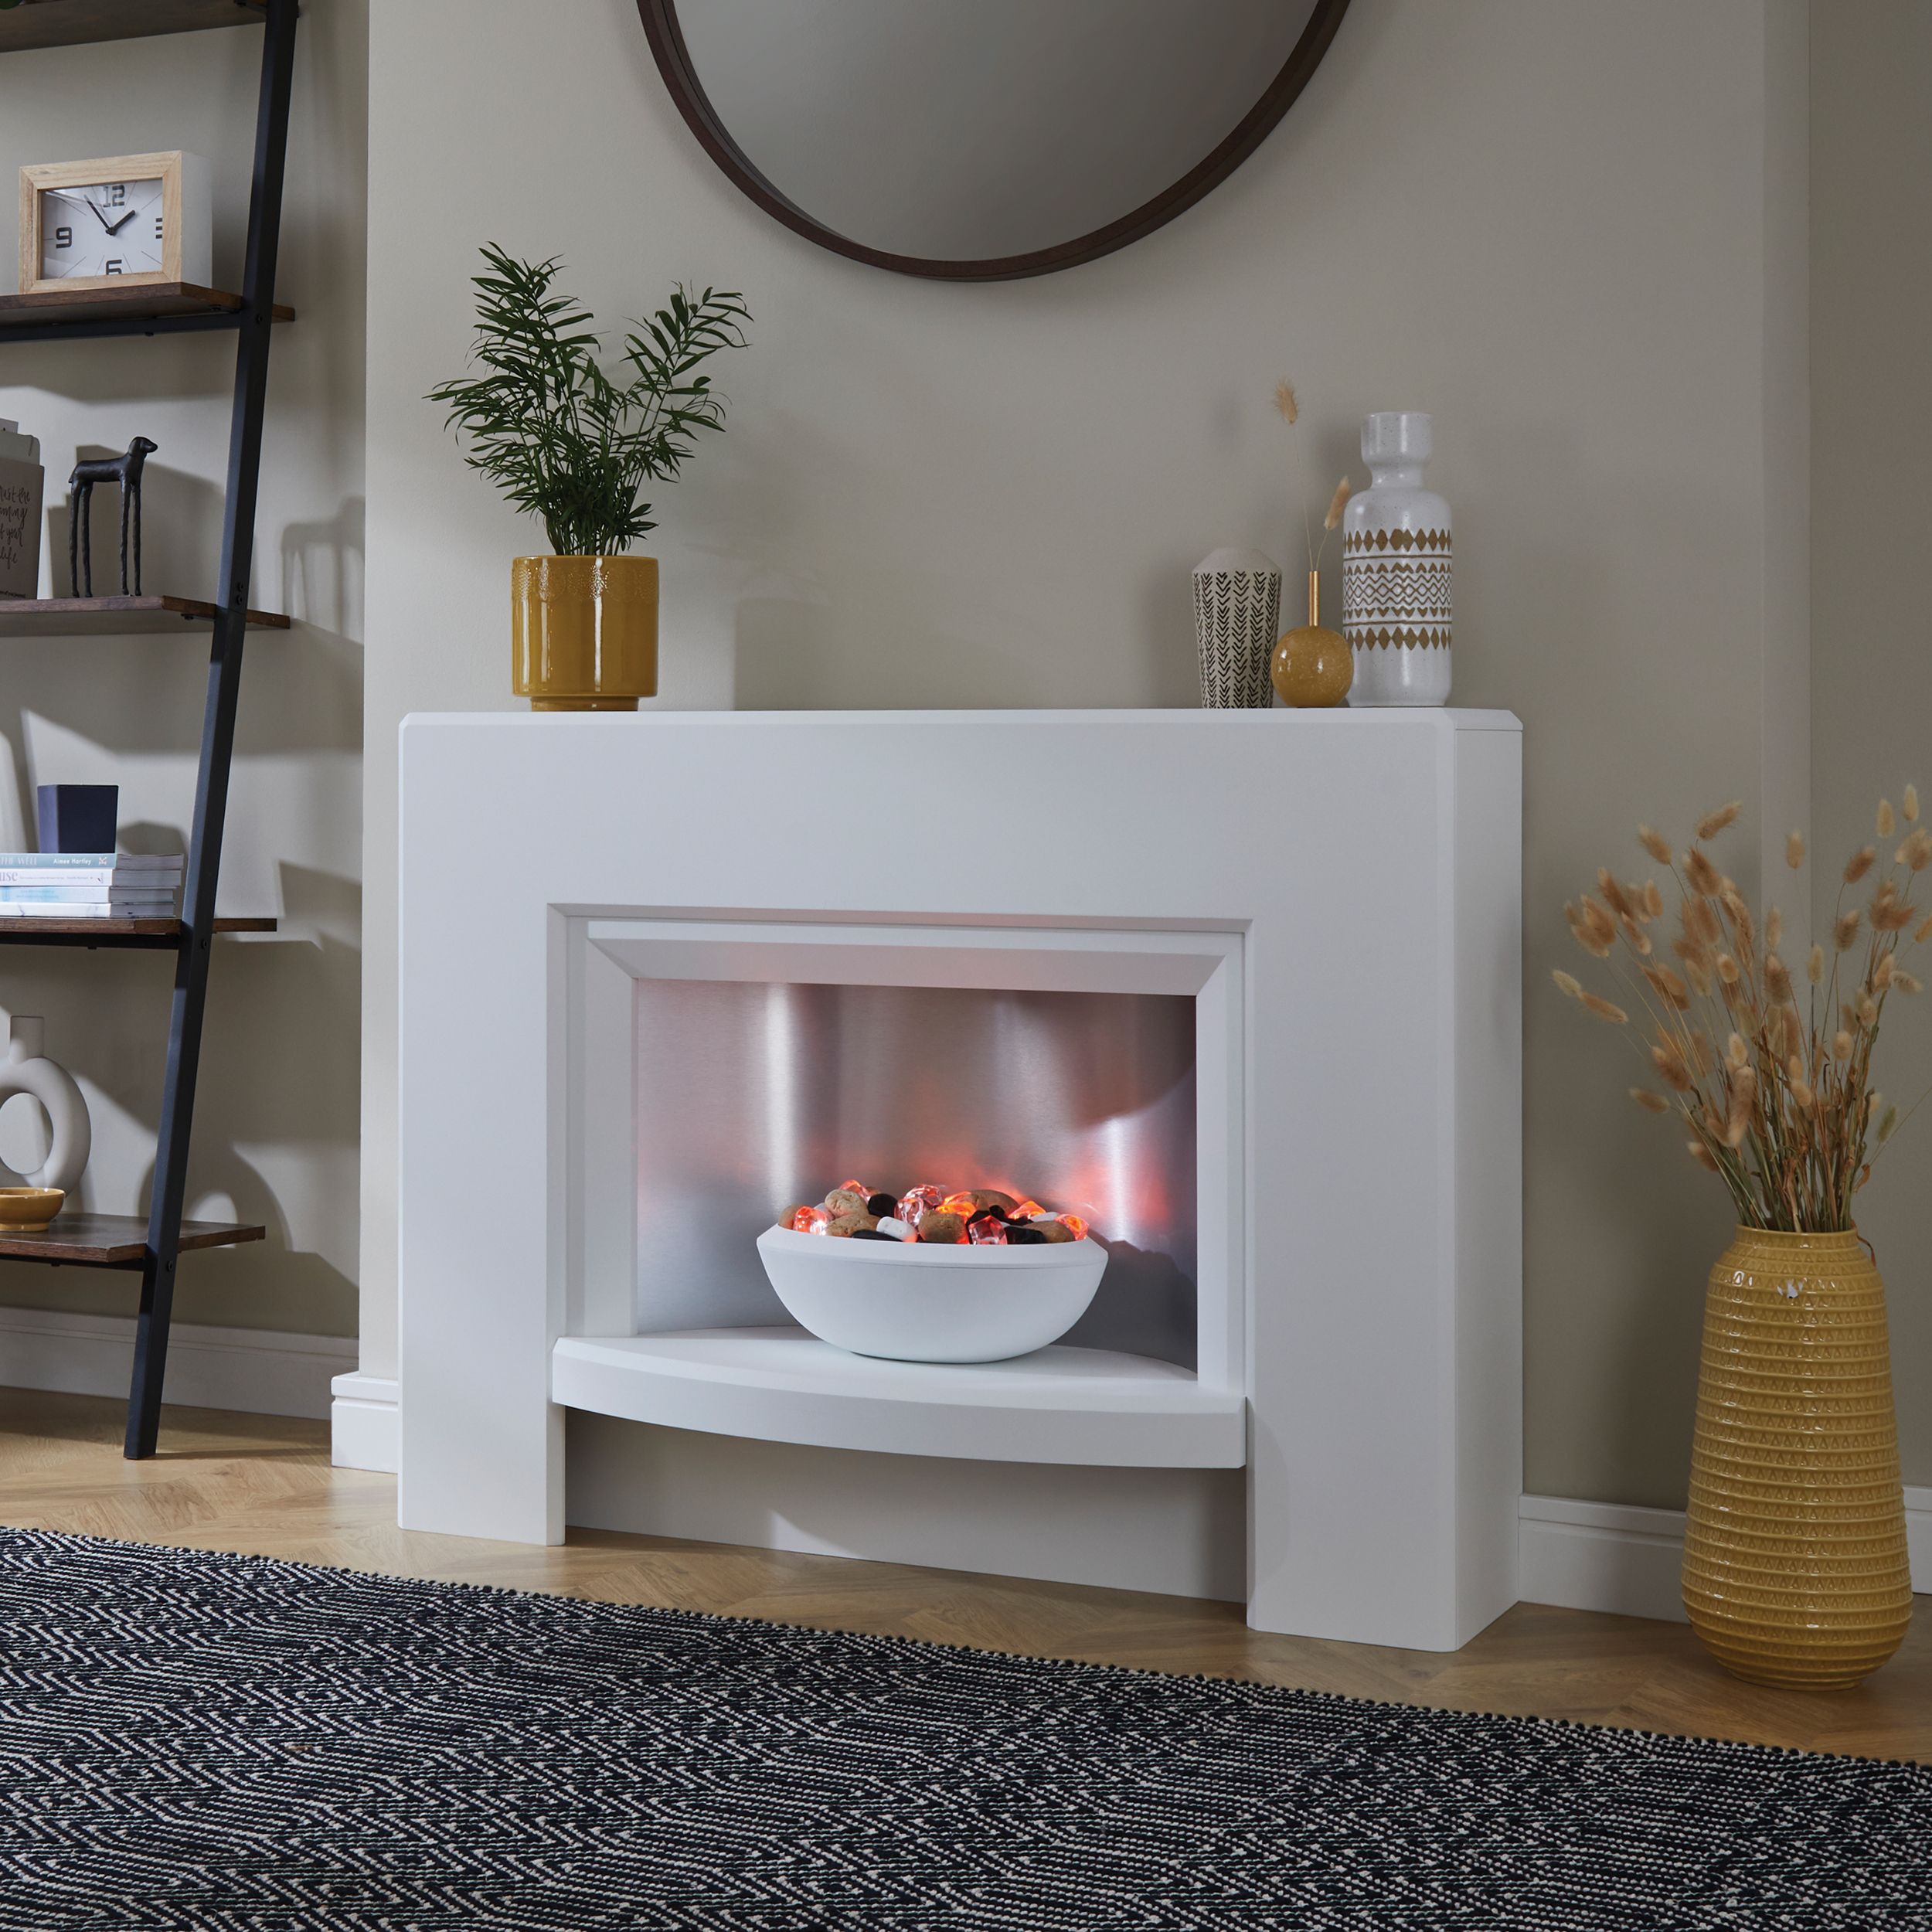 Suncrest Stockeld White MDF & stainless steel Freestanding Electric fire suite